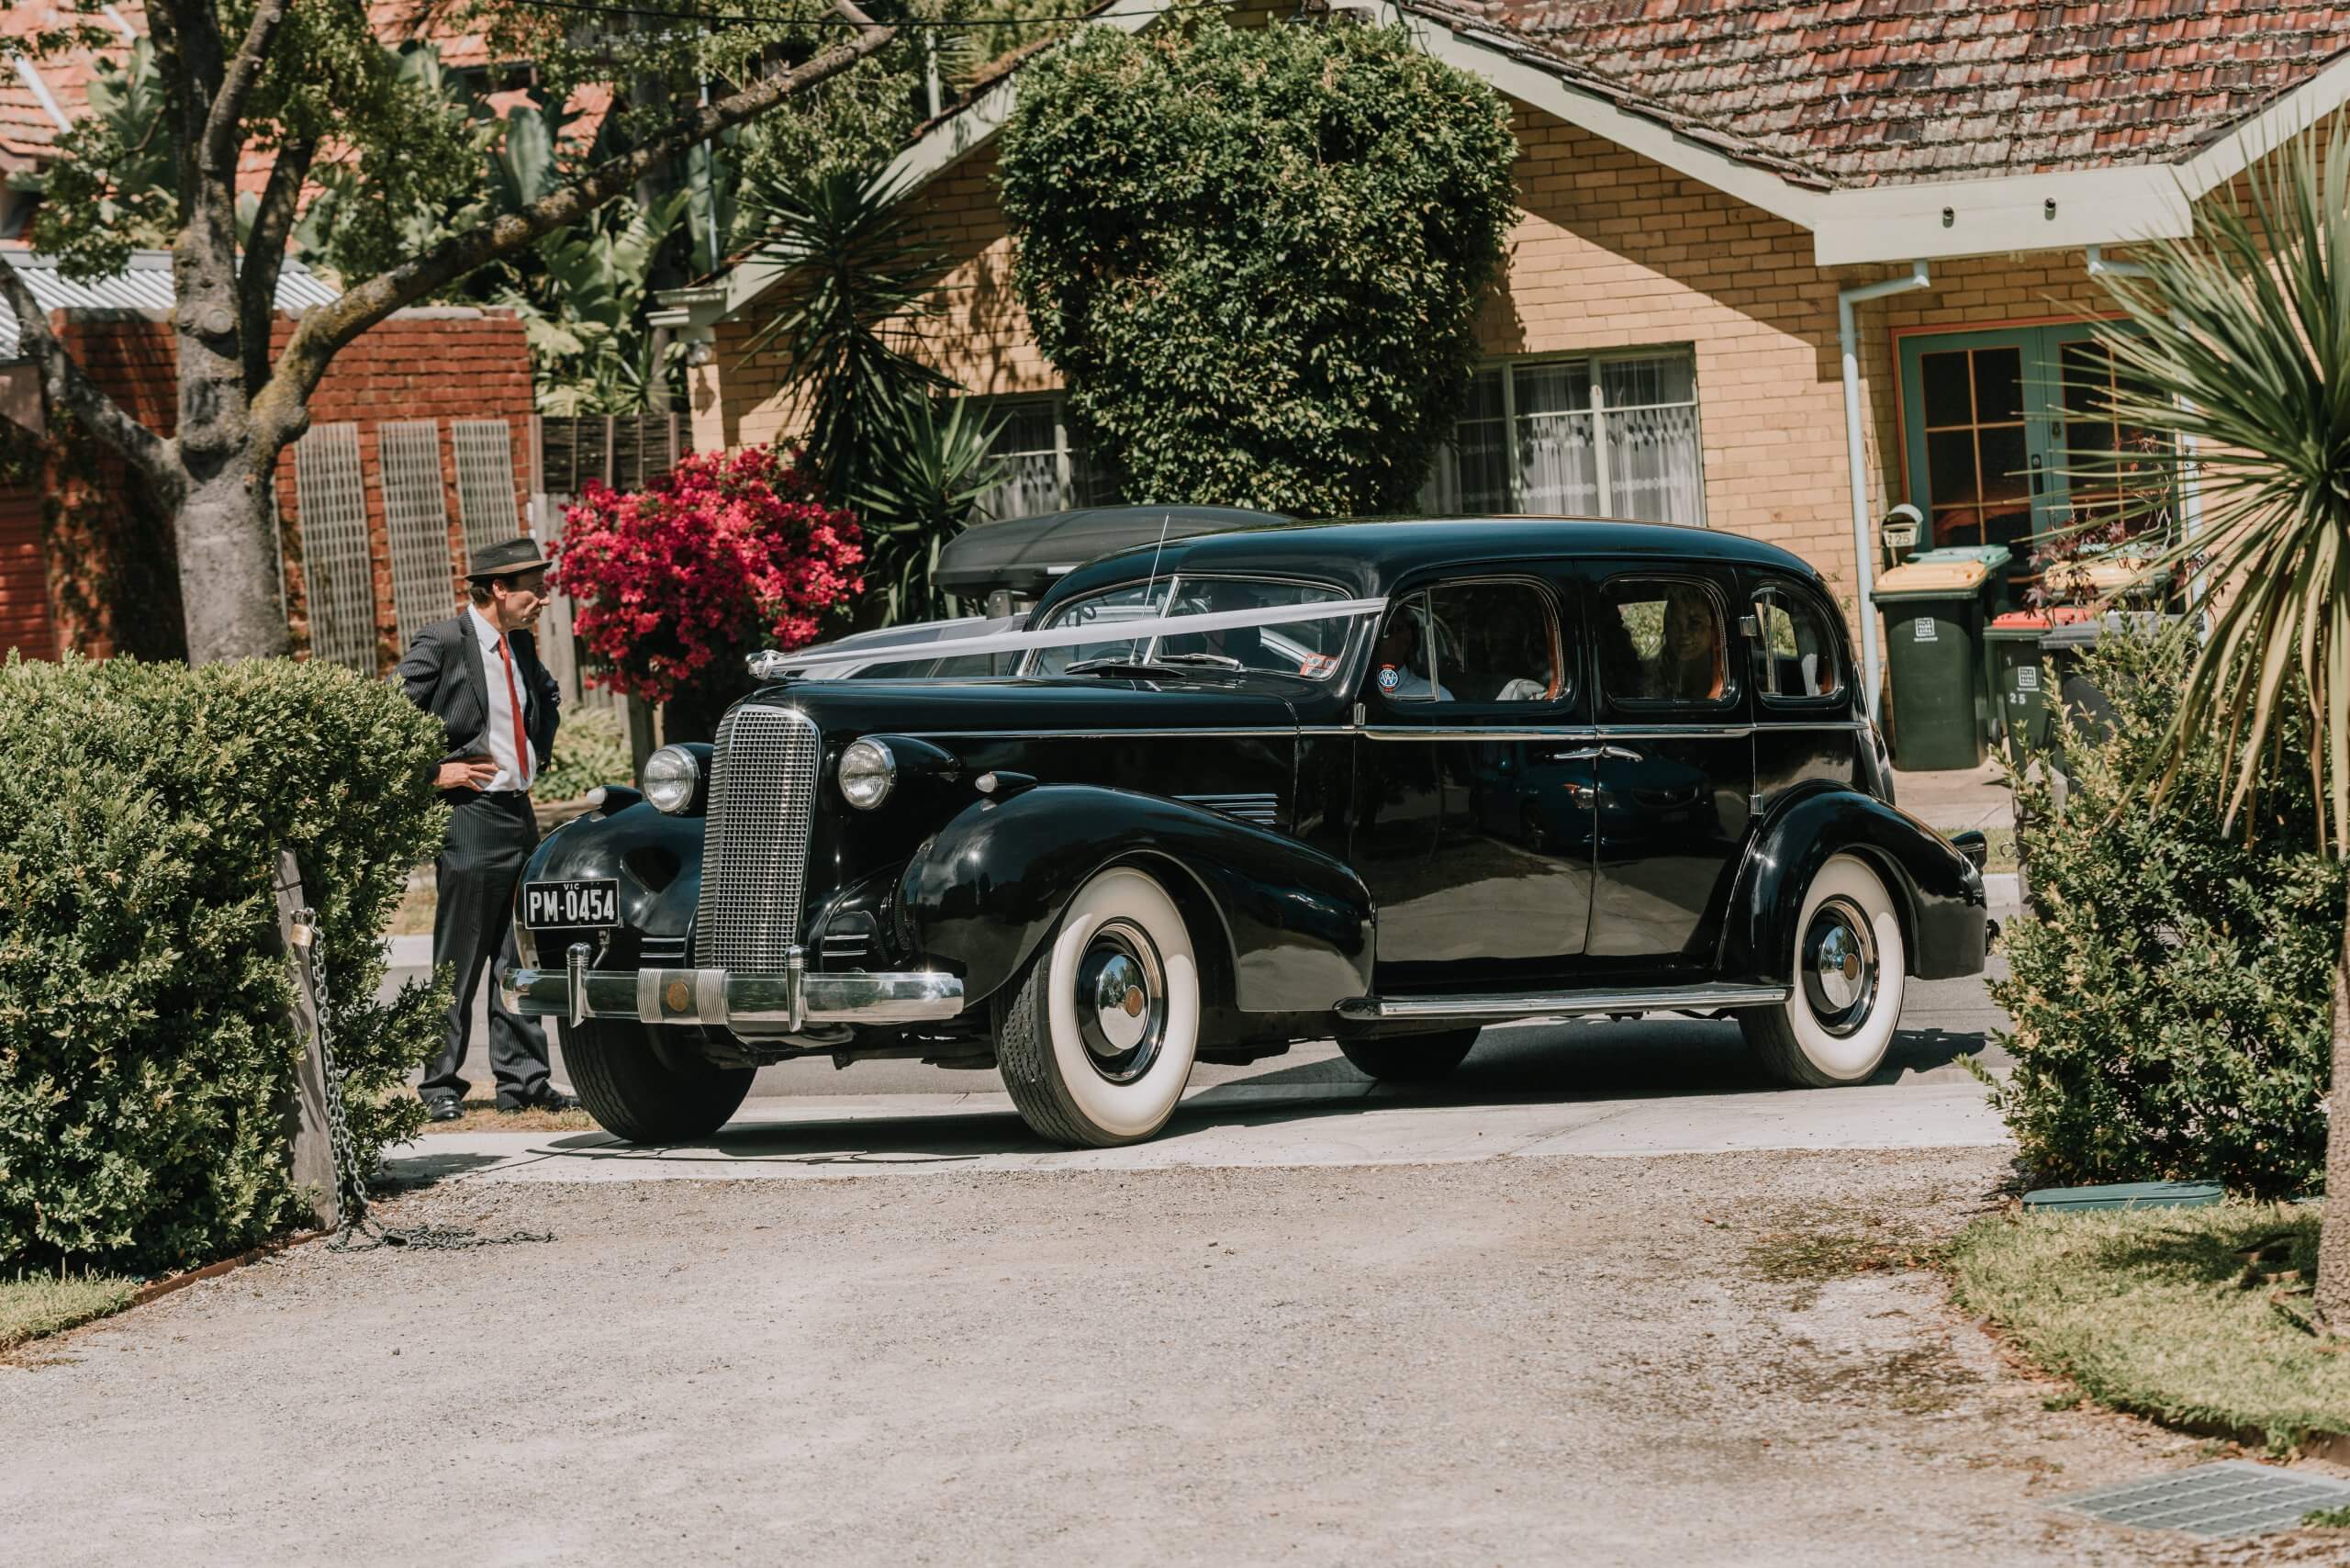 This vintage black cadillac is the couples choice as wedding car. Captured by Black Avenue Productions